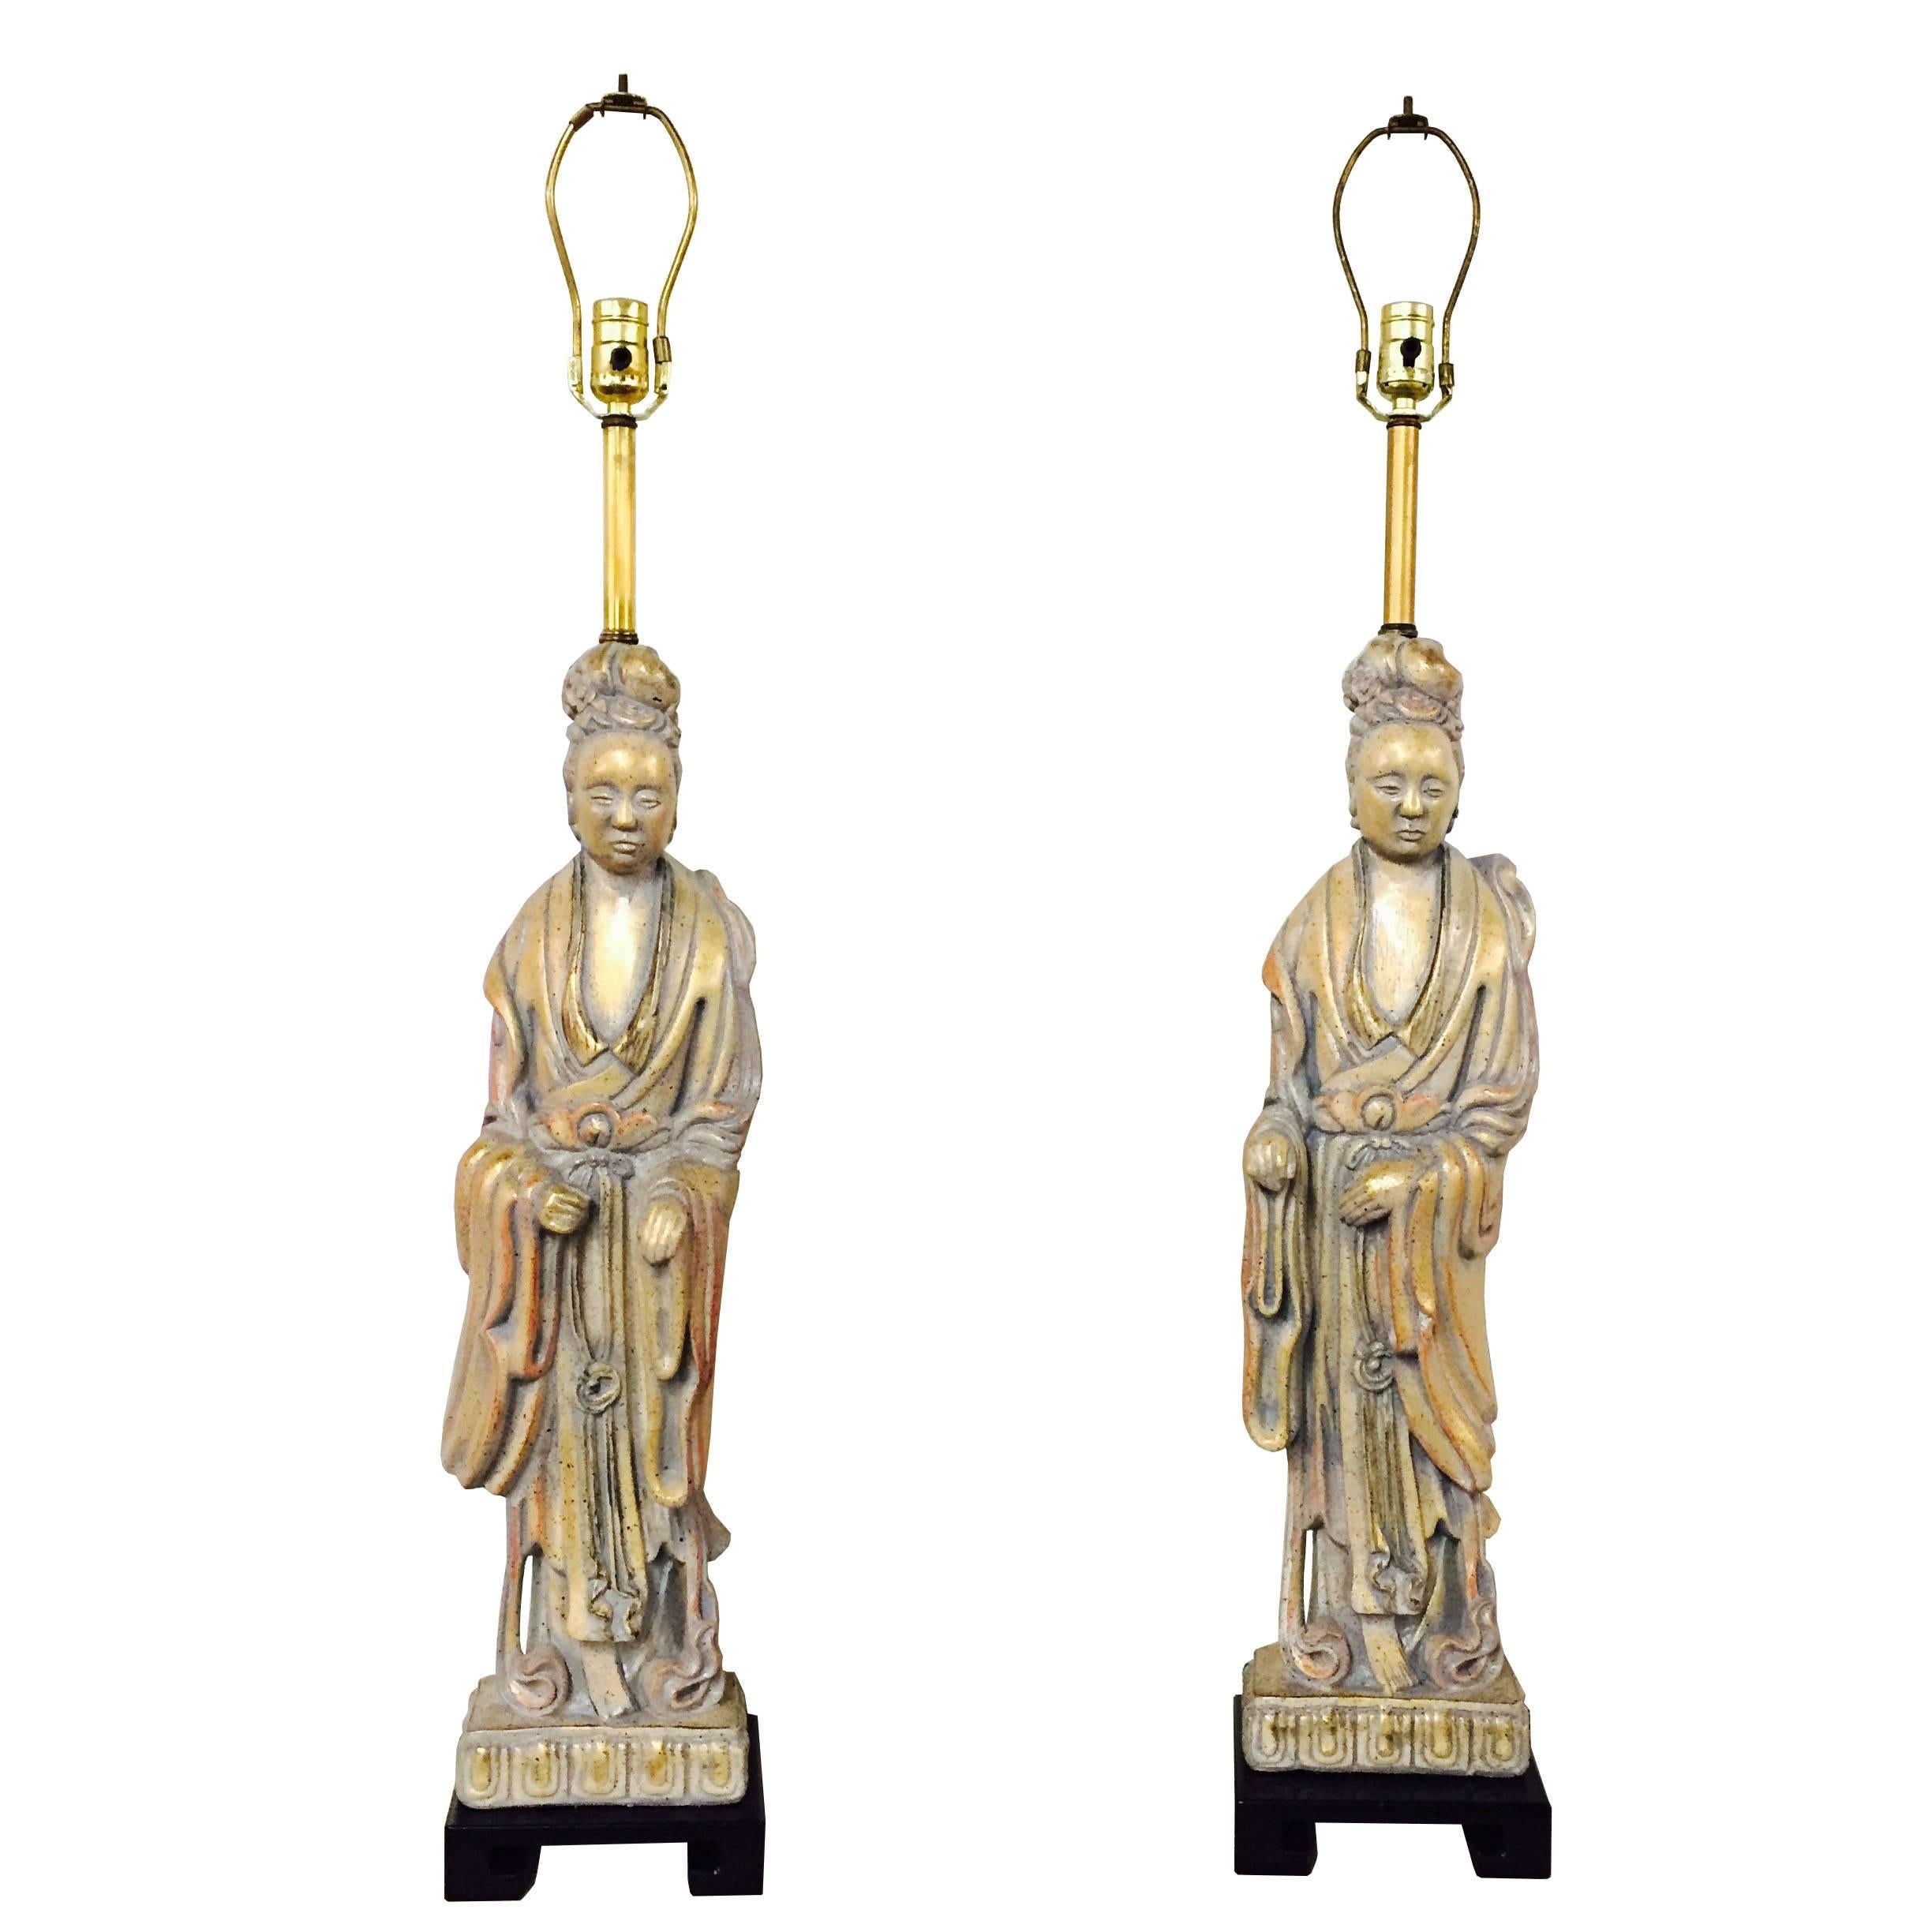 Pair of 1940s Quan Yin table lamps by Frederick Cooper.

Dimensions: 7.5" W x 6.5" D x 36" T (top of socket).

Shades not included.
   